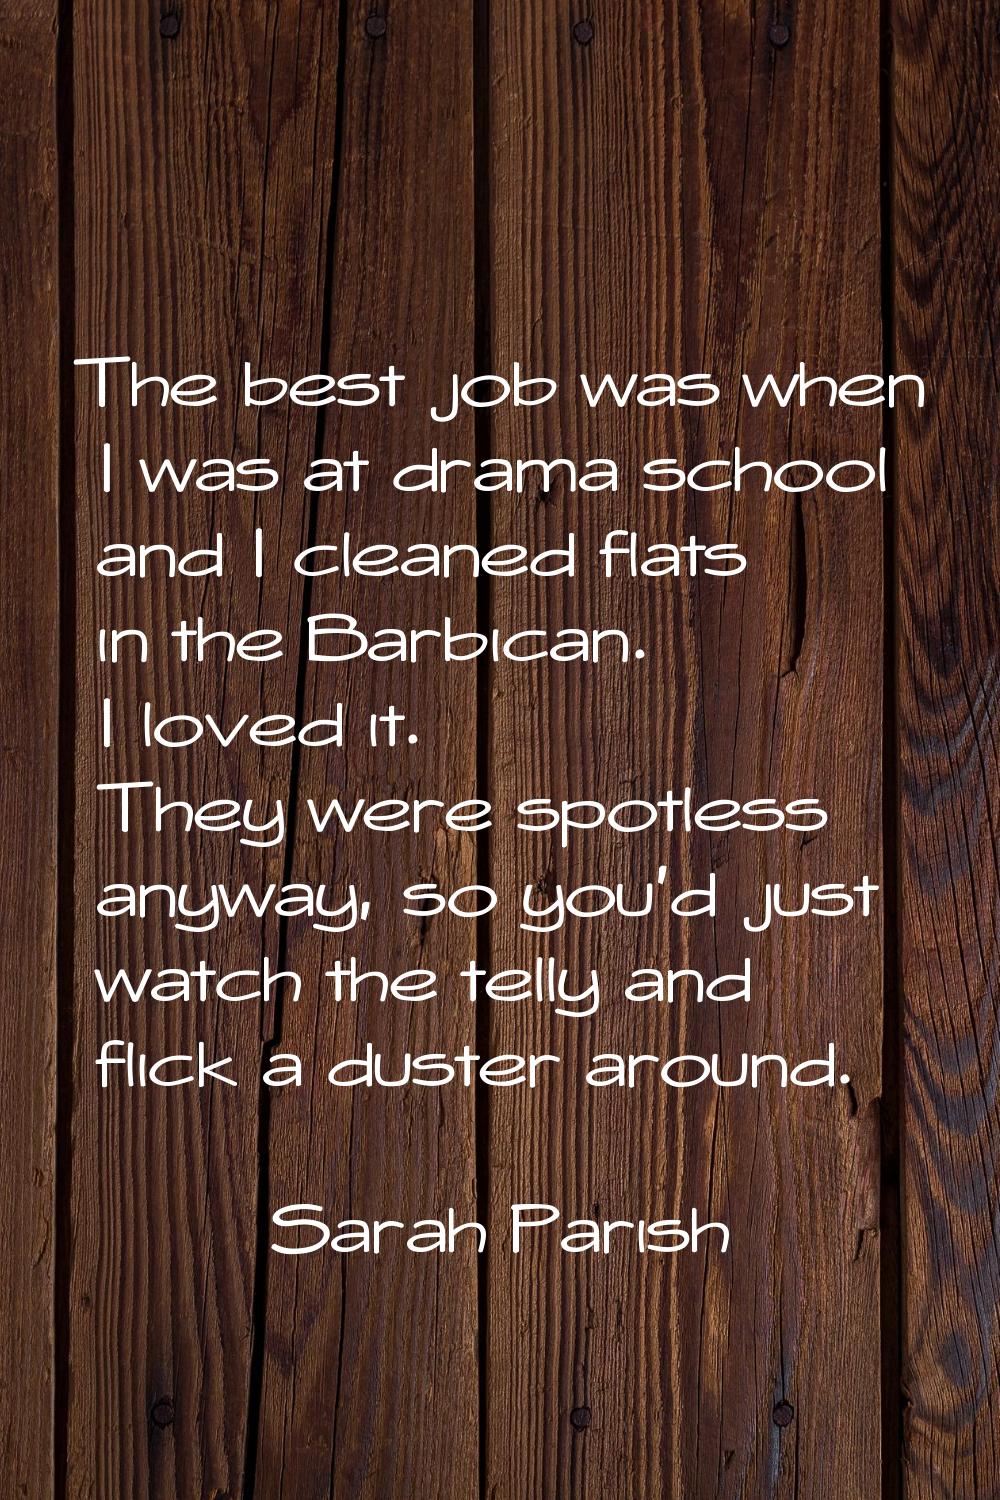 The best job was when I was at drama school and I cleaned flats in the Barbican. I loved it. They w